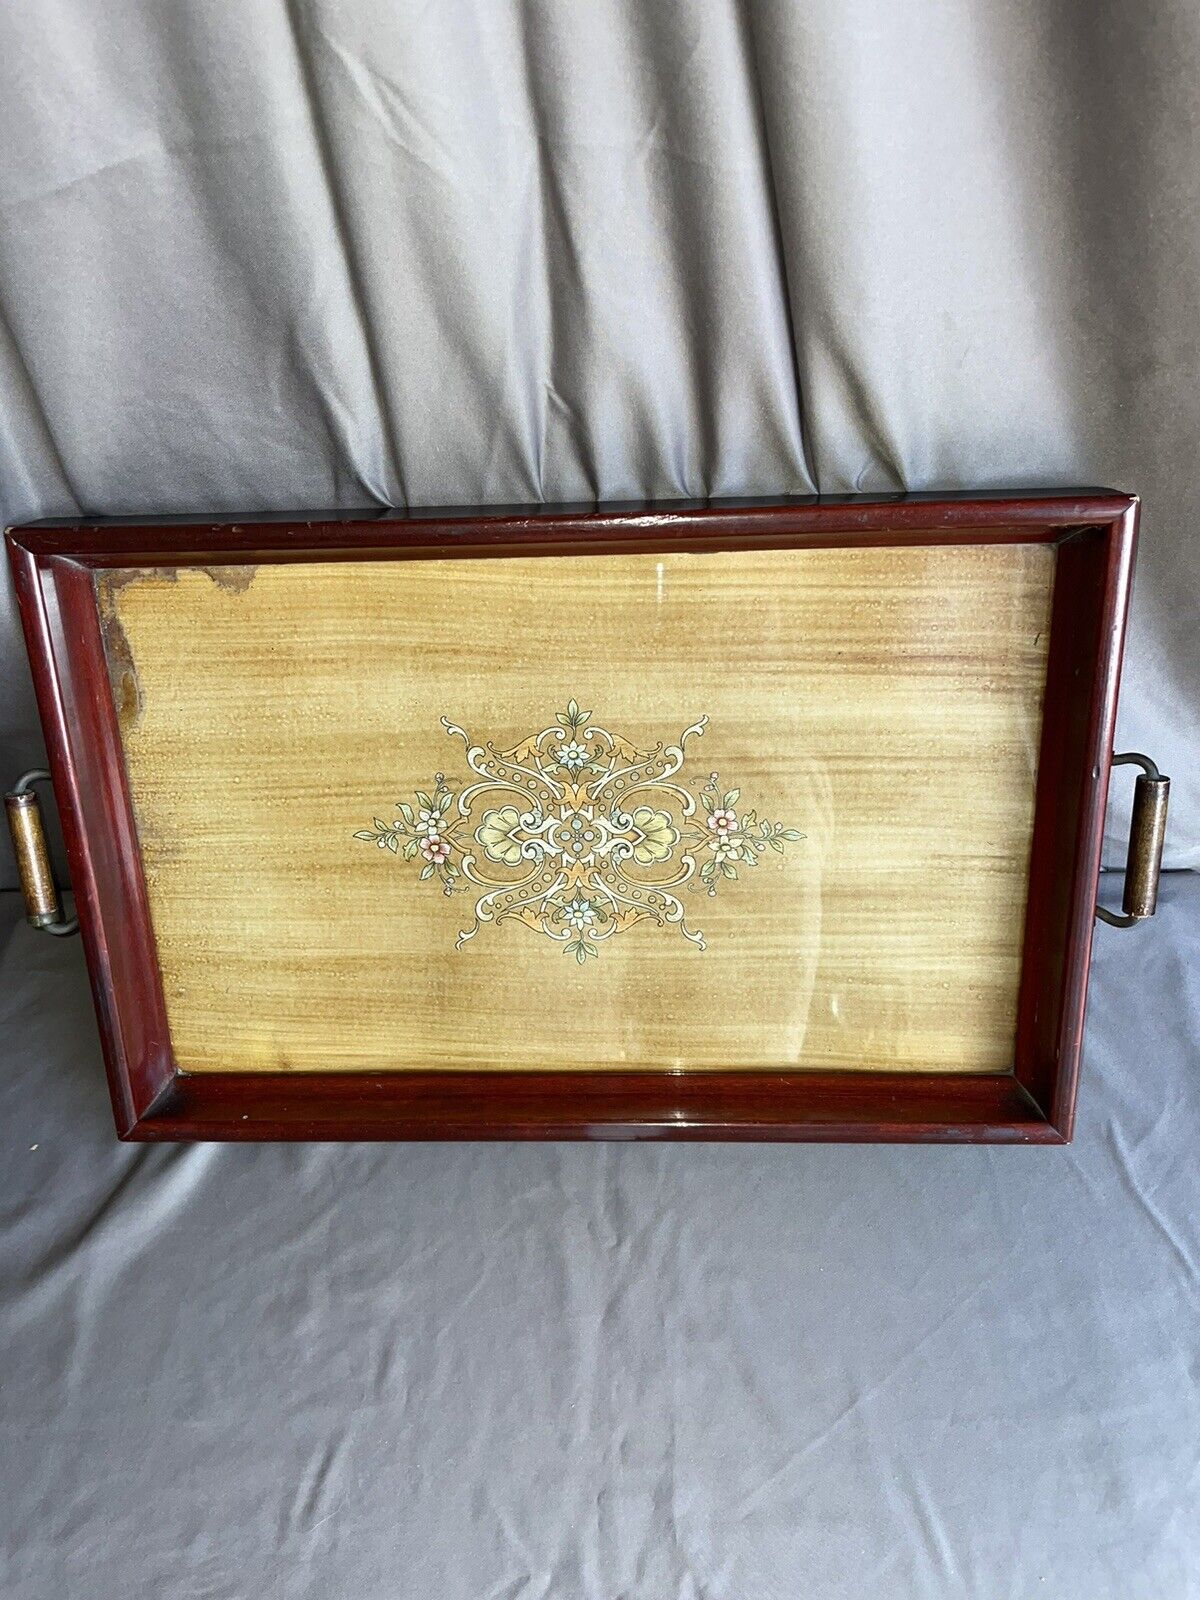 ANTIQUE  WOOD & FLORAL EMBROIDERY CLOTH BOTTOM SERVING JEWELRY TRAY BRASS HANDLE